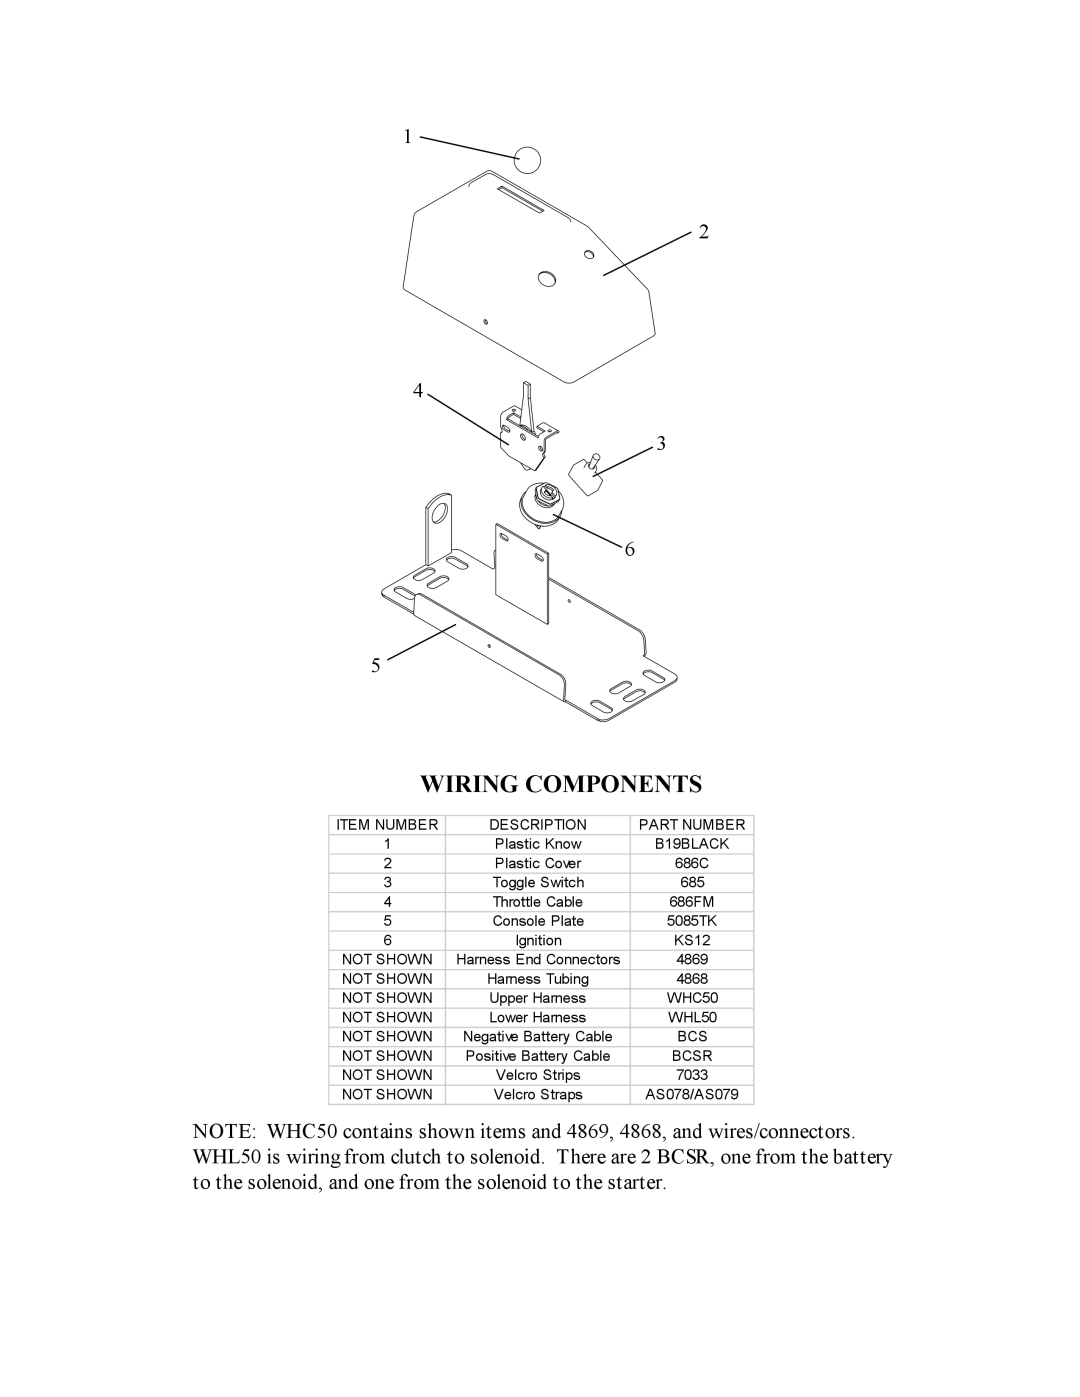 Swisher pol1250f owner manual Wiring Components, Lower Harness 